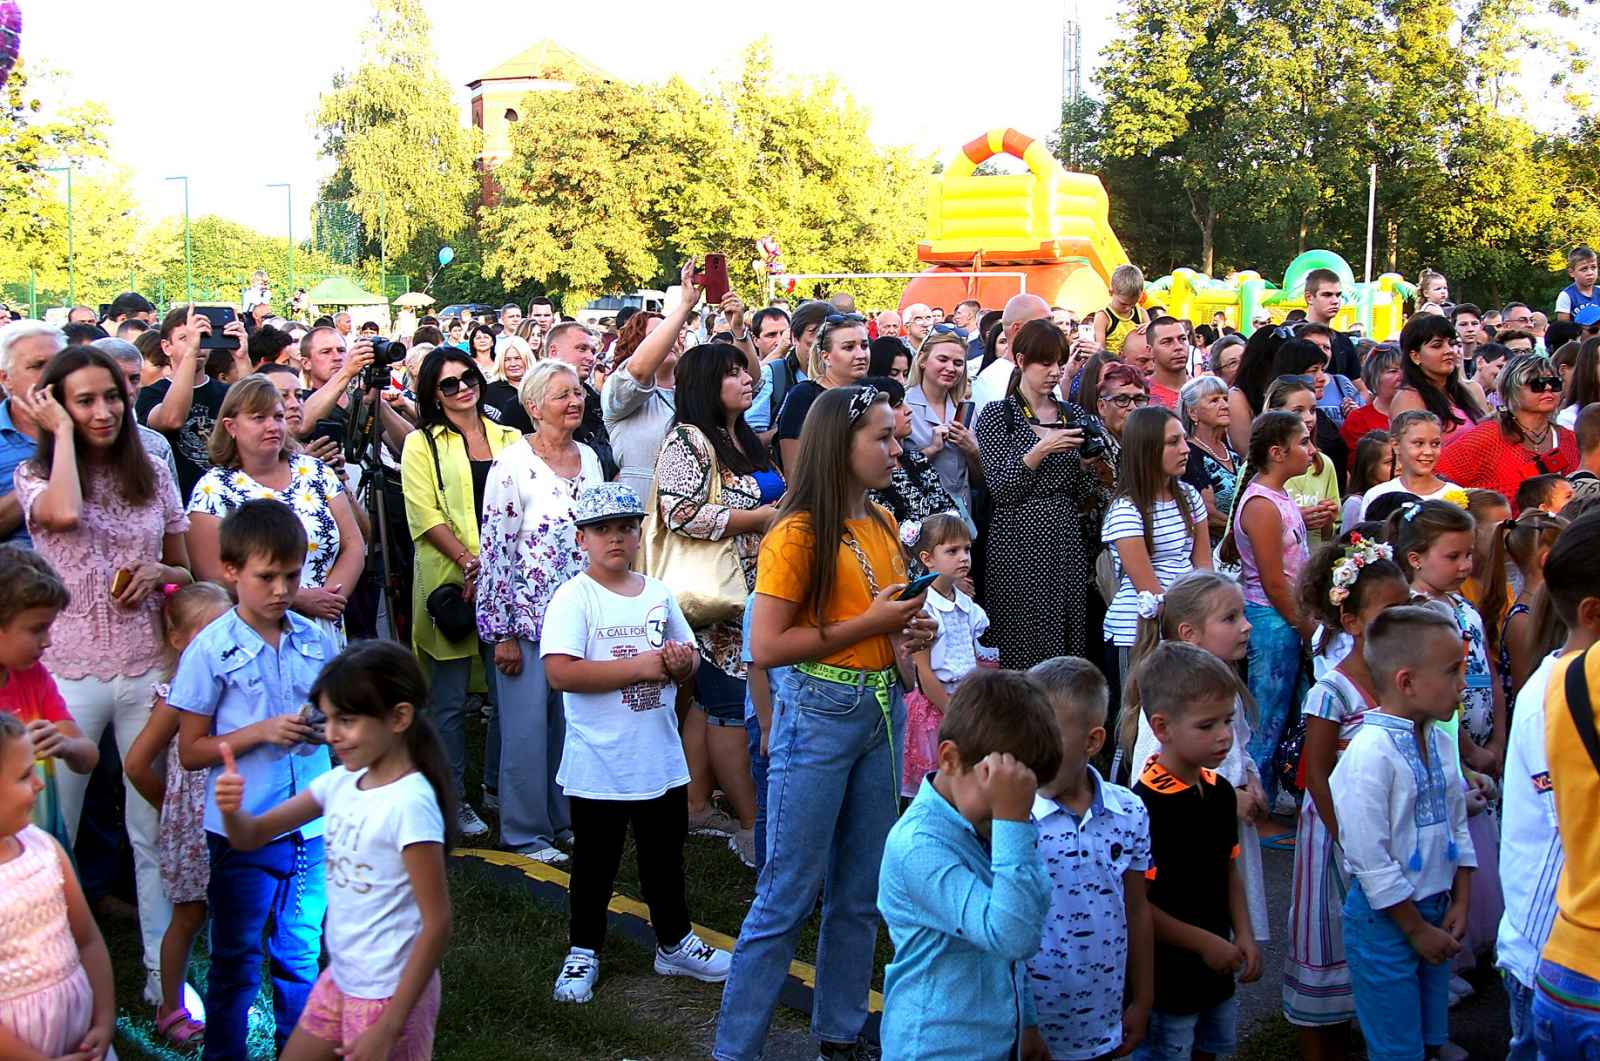 Archive photo of the Pivdenne Town Day celebration in 2021 